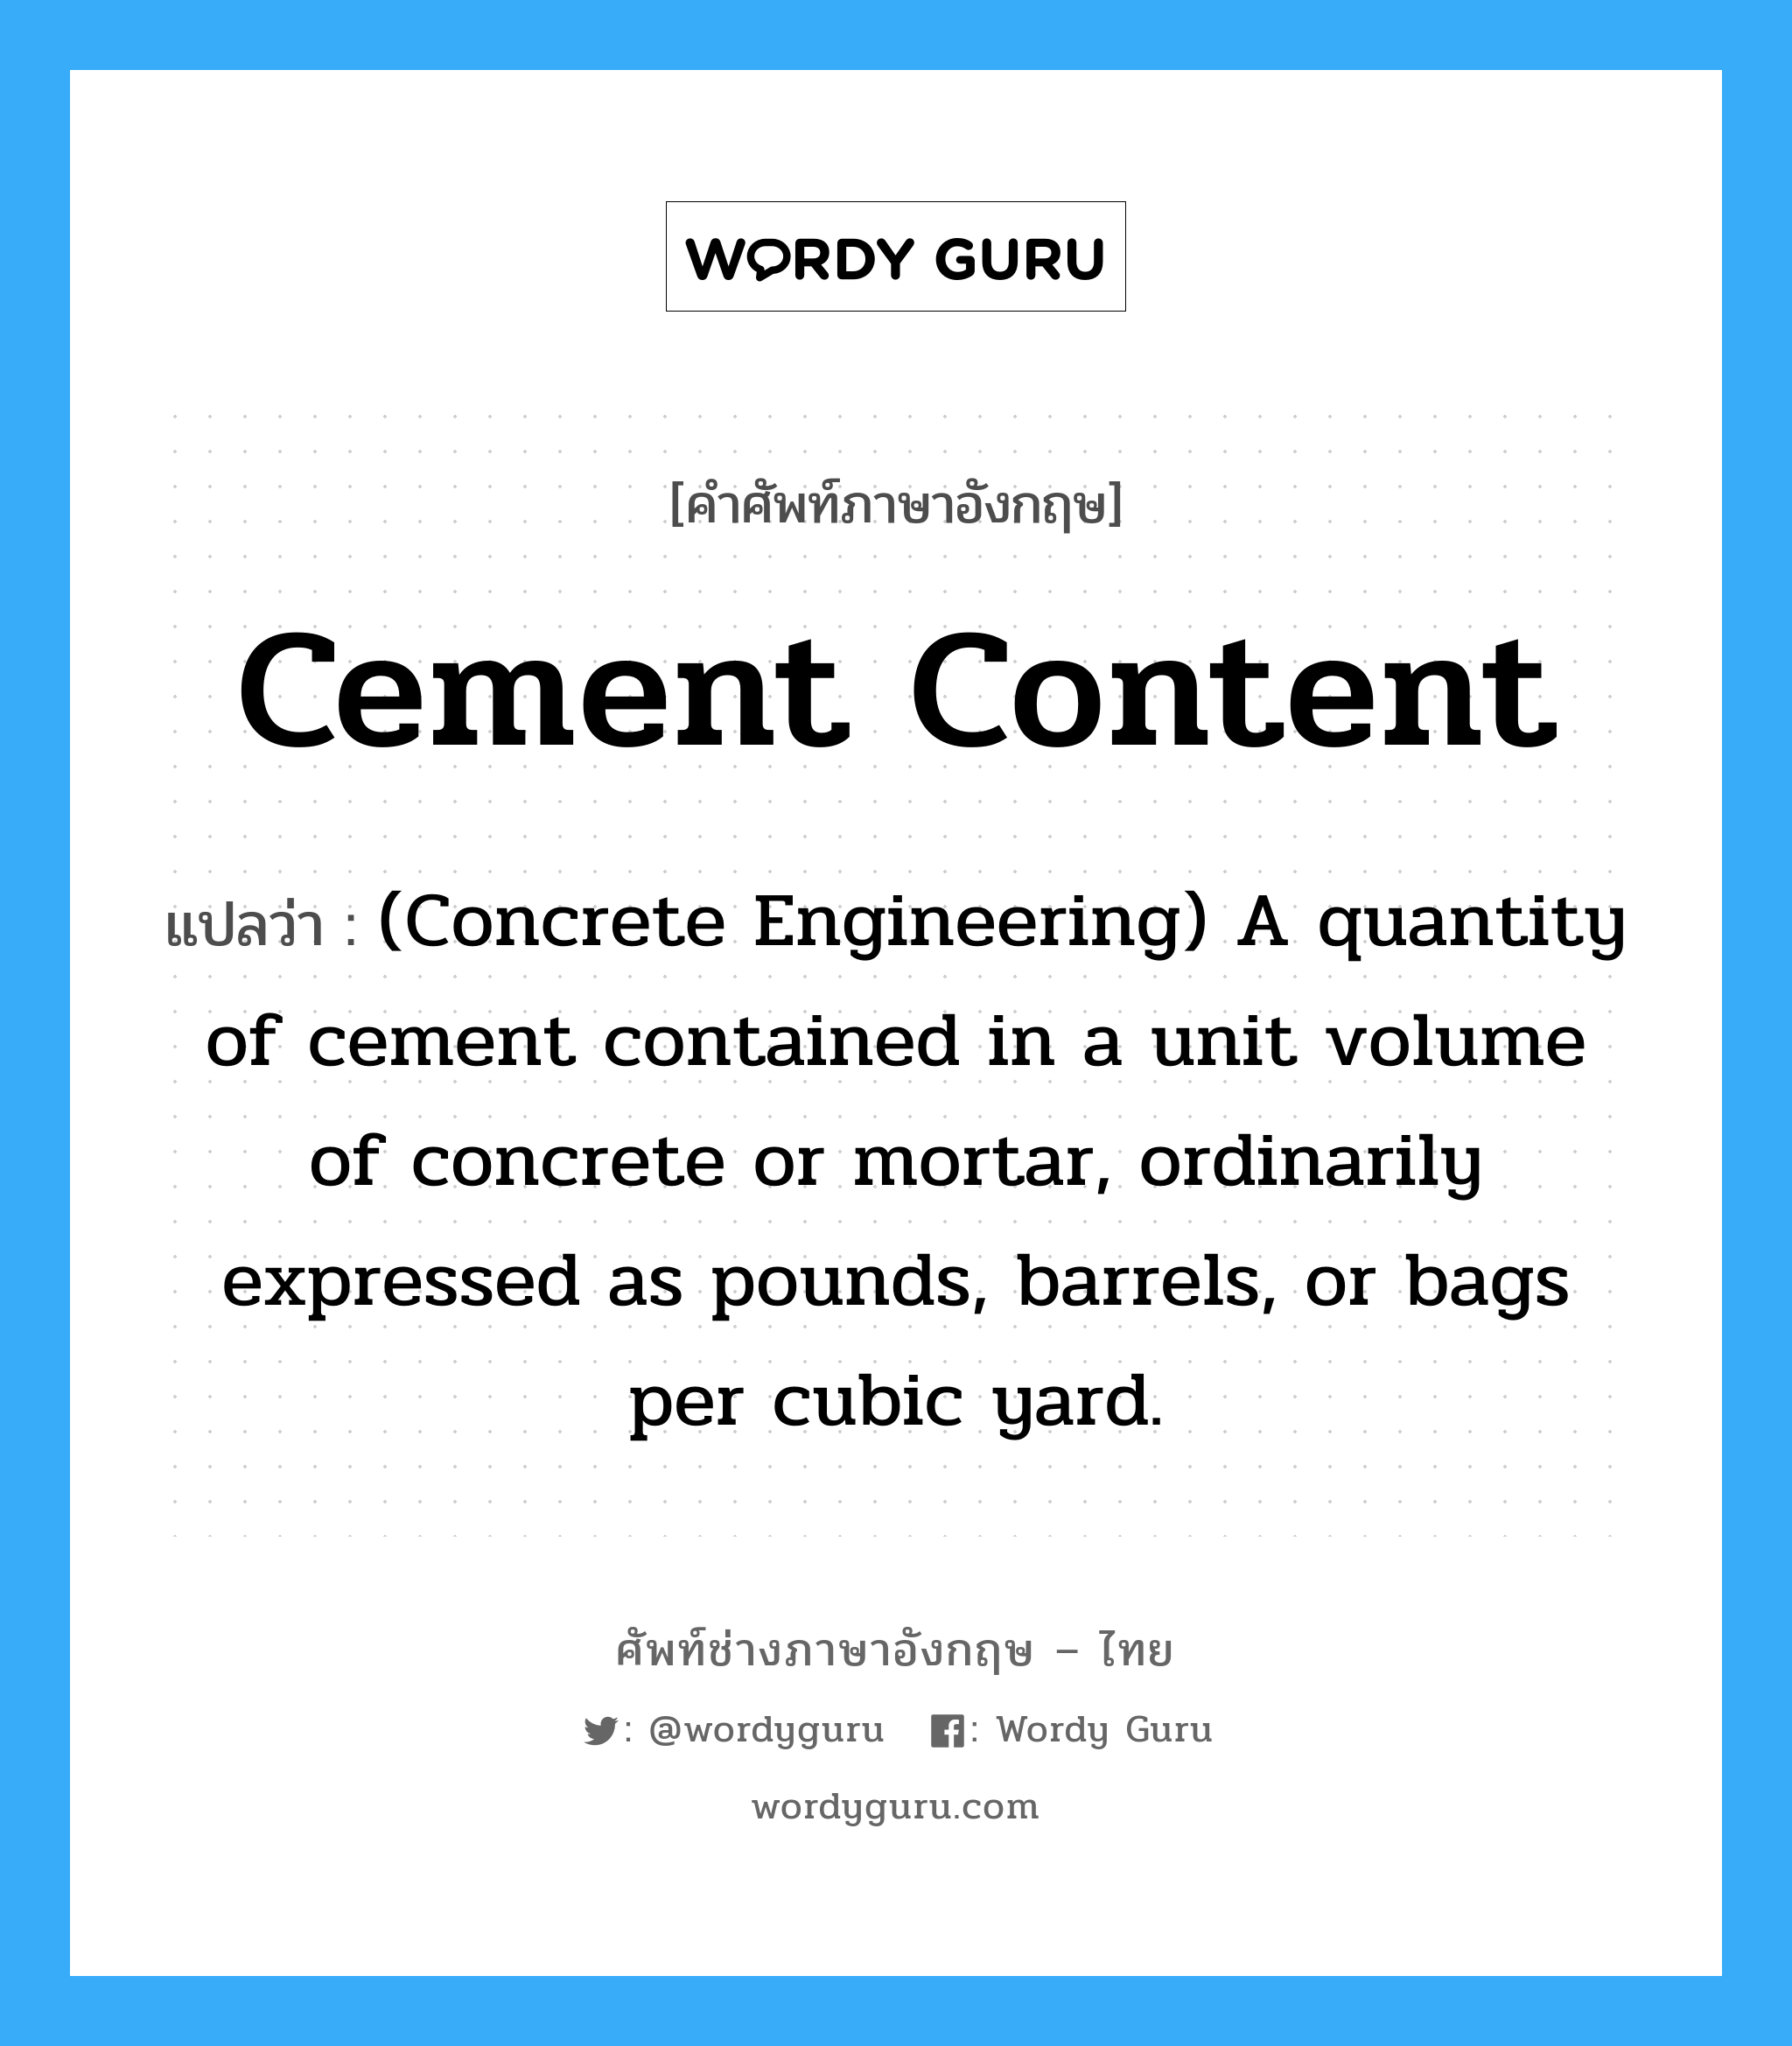 Cement Content แปลว่า?, คำศัพท์ช่างภาษาอังกฤษ - ไทย Cement Content คำศัพท์ภาษาอังกฤษ Cement Content แปลว่า (Concrete Engineering) A quantity of cement contained in a unit volume of concrete or mortar, ordinarily expressed as pounds, barrels, or bags per cubic yard.